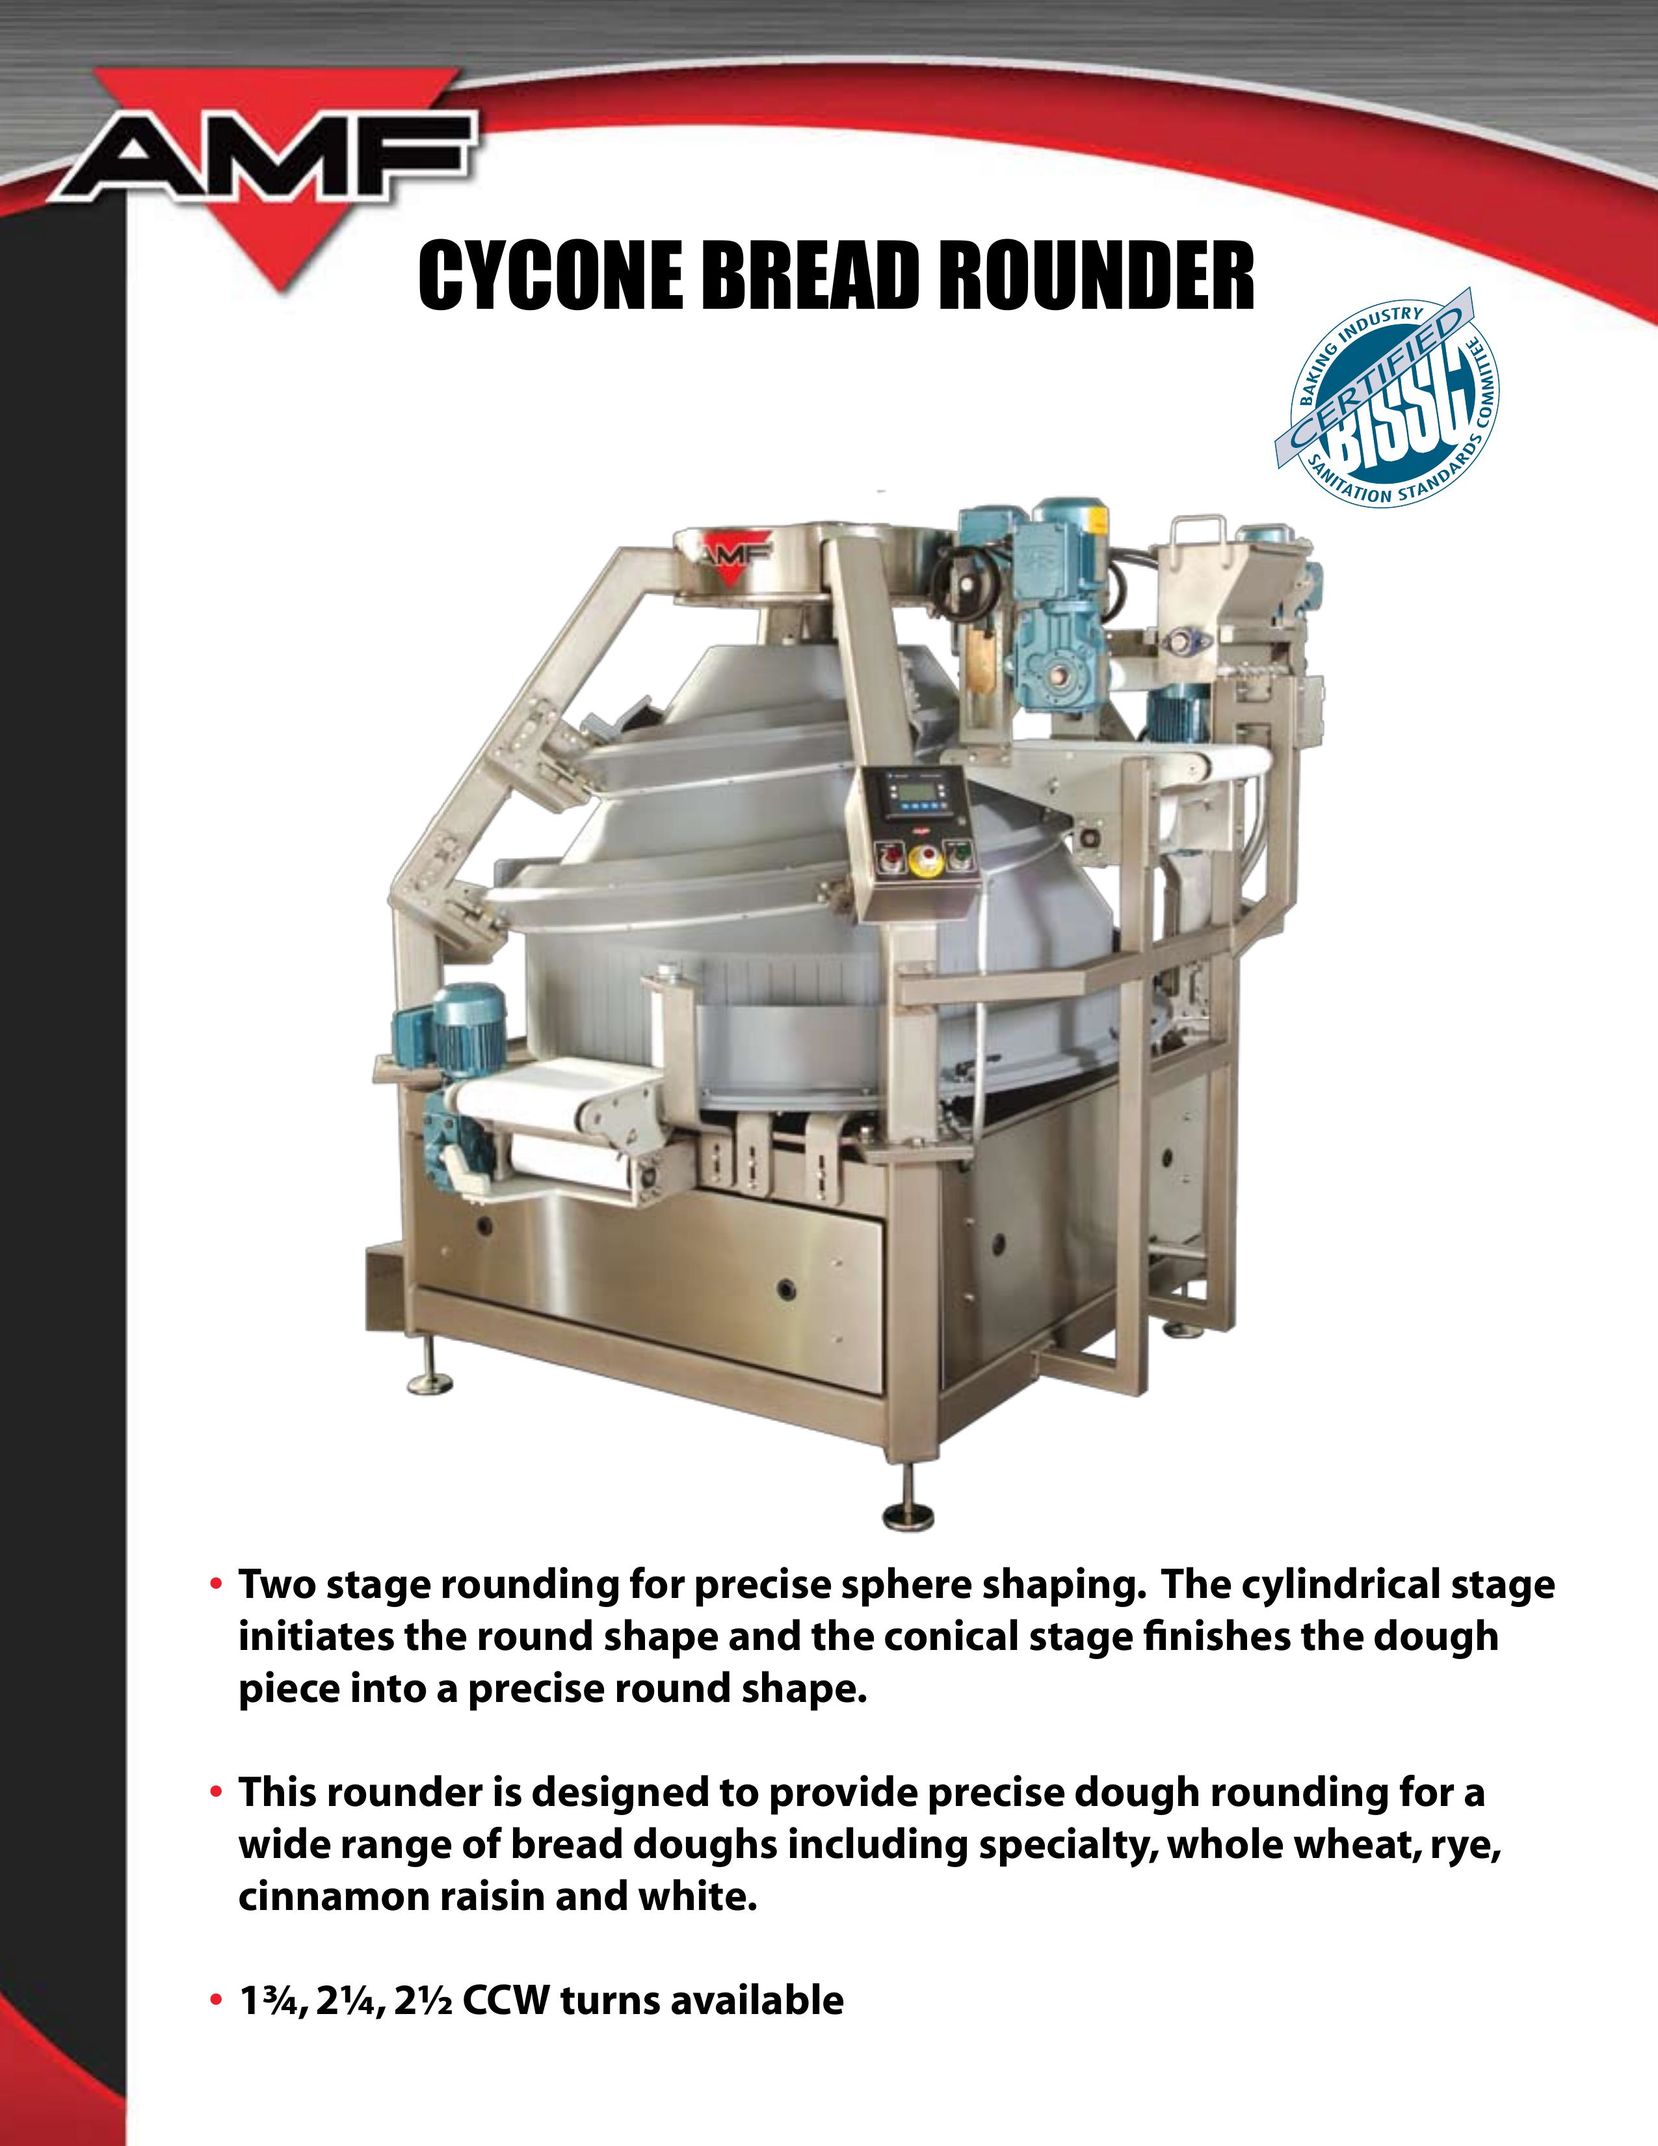 AMF Cycone Bread Rounder Kitchen Utensil User Manual